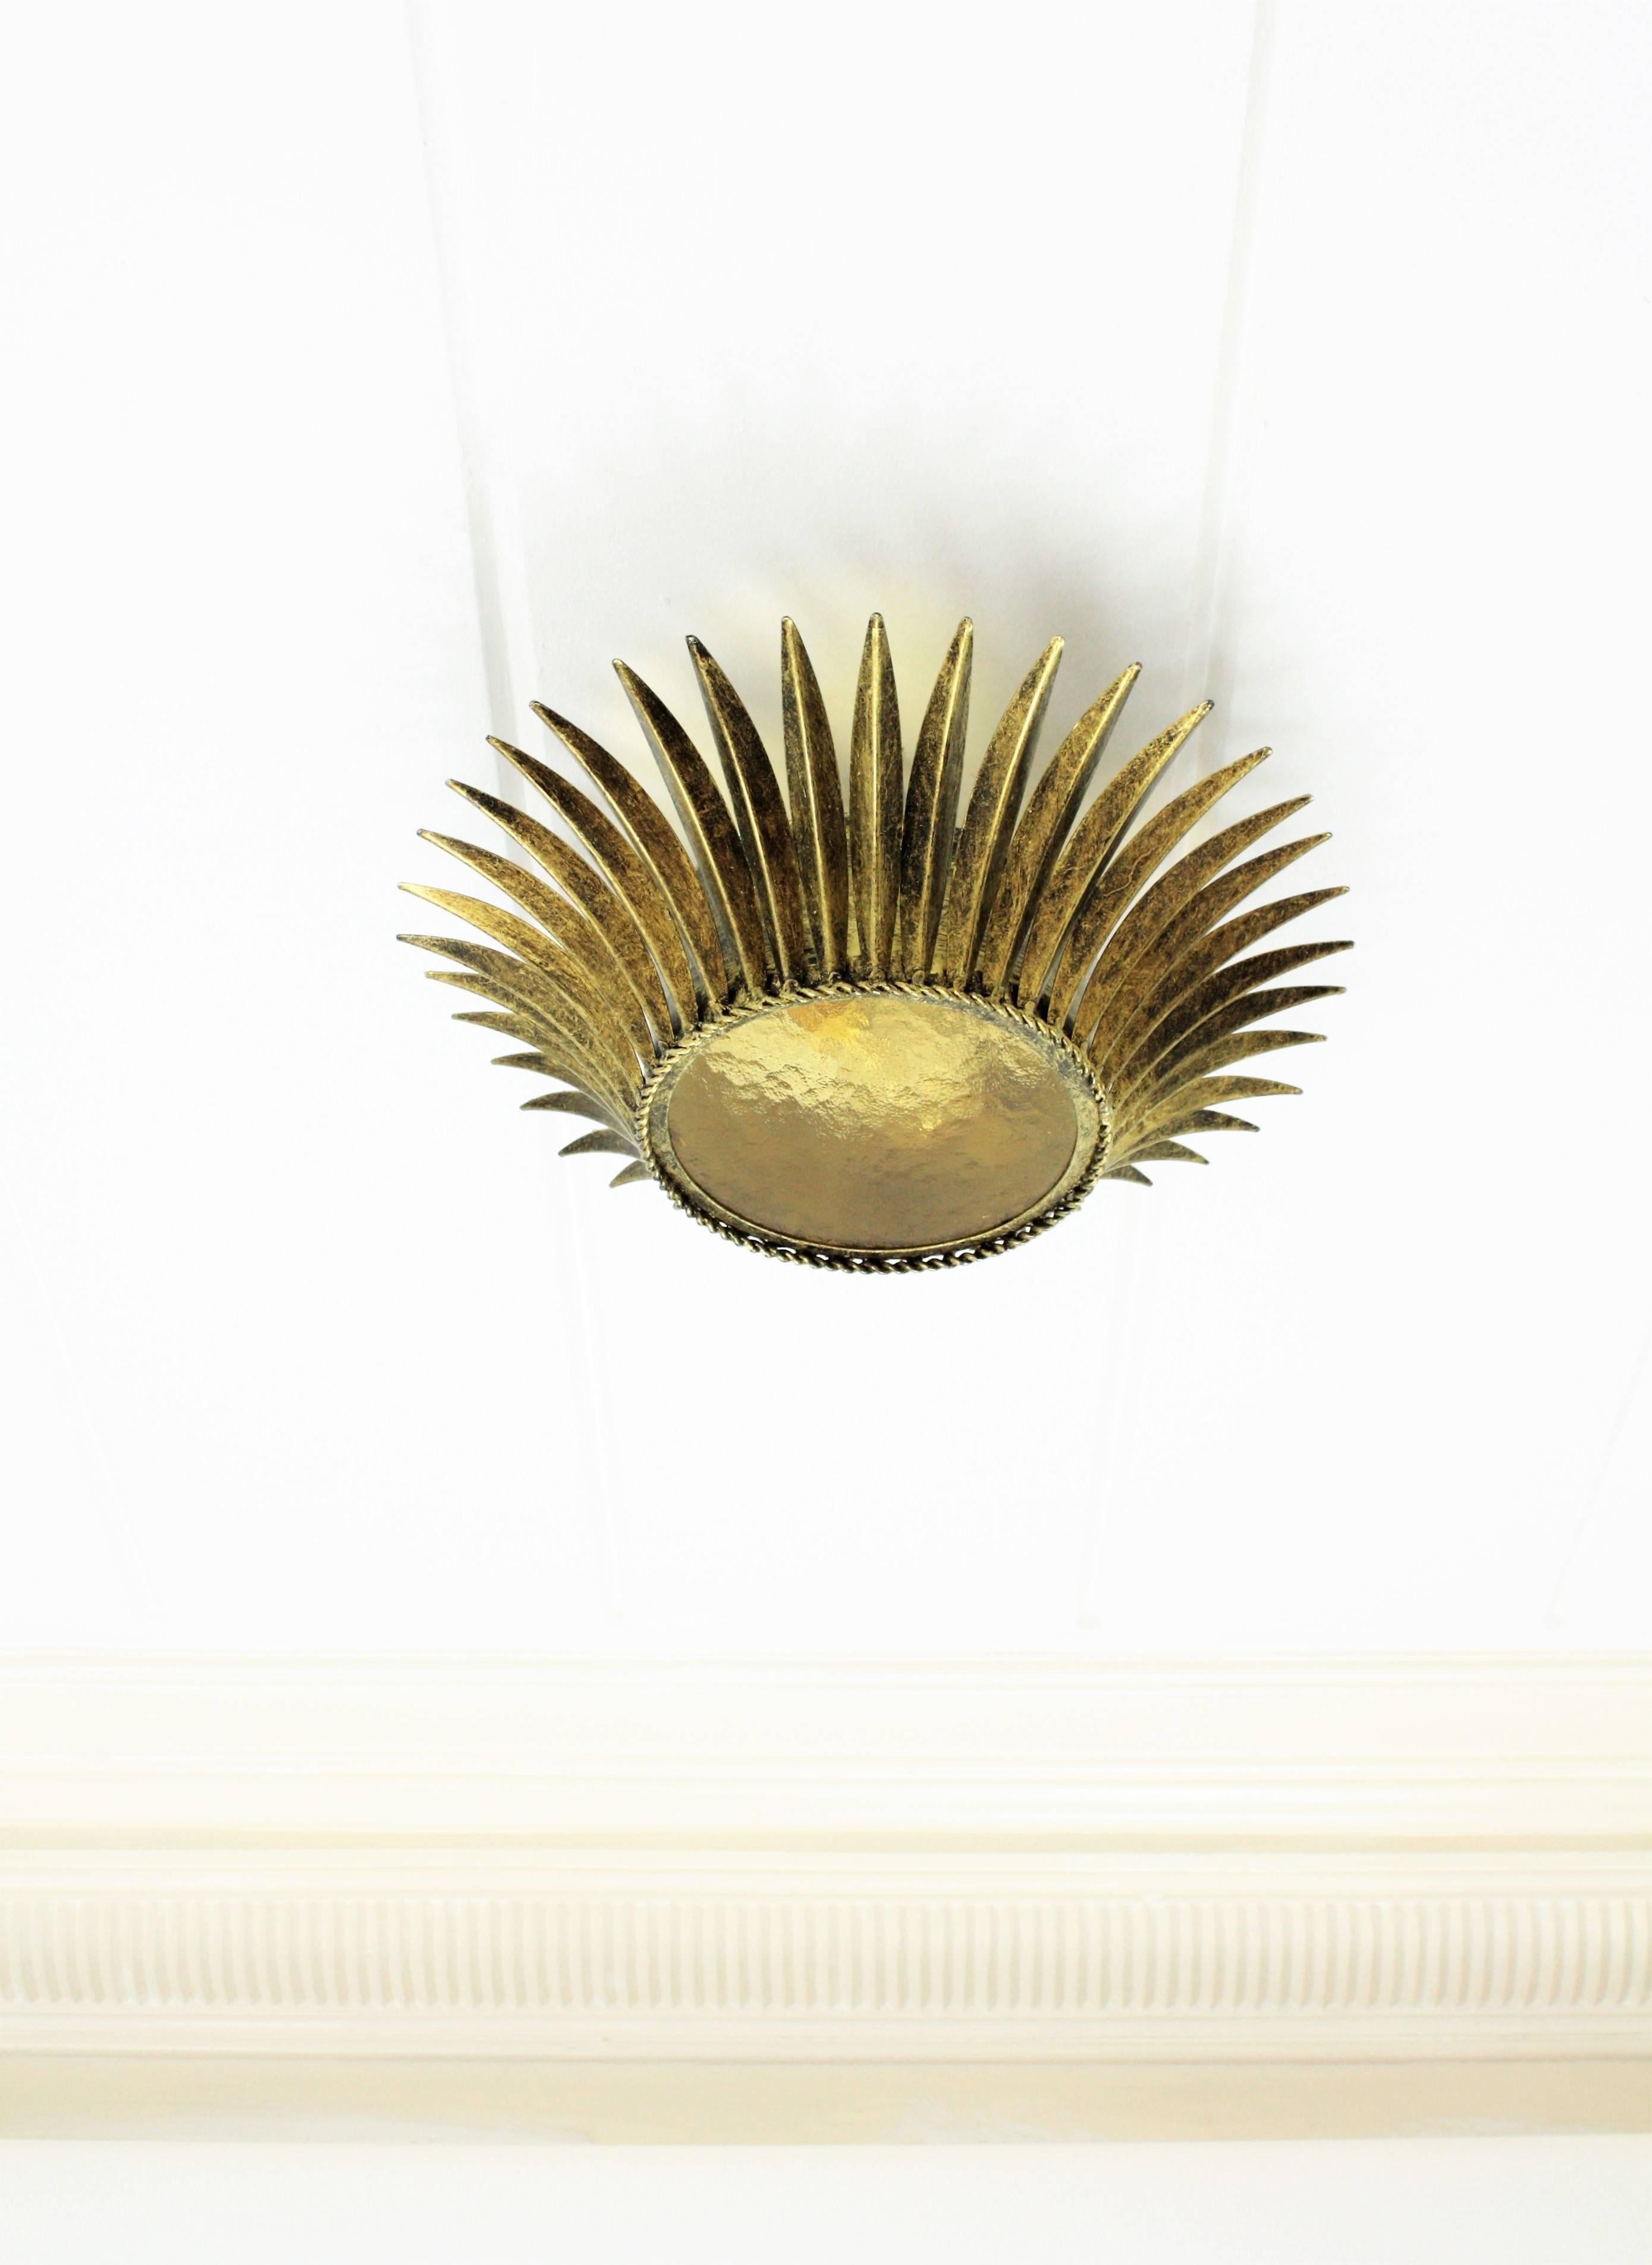 An elegant crown shape sunburst light fixture or flush mount made in gilt ron with amber glass. It has one bulb. The glass shade diameter is 16.5 cm
Spain, 1950s. The glass can be changed by a frosted glass by request.

Follow  us as 1stDibs